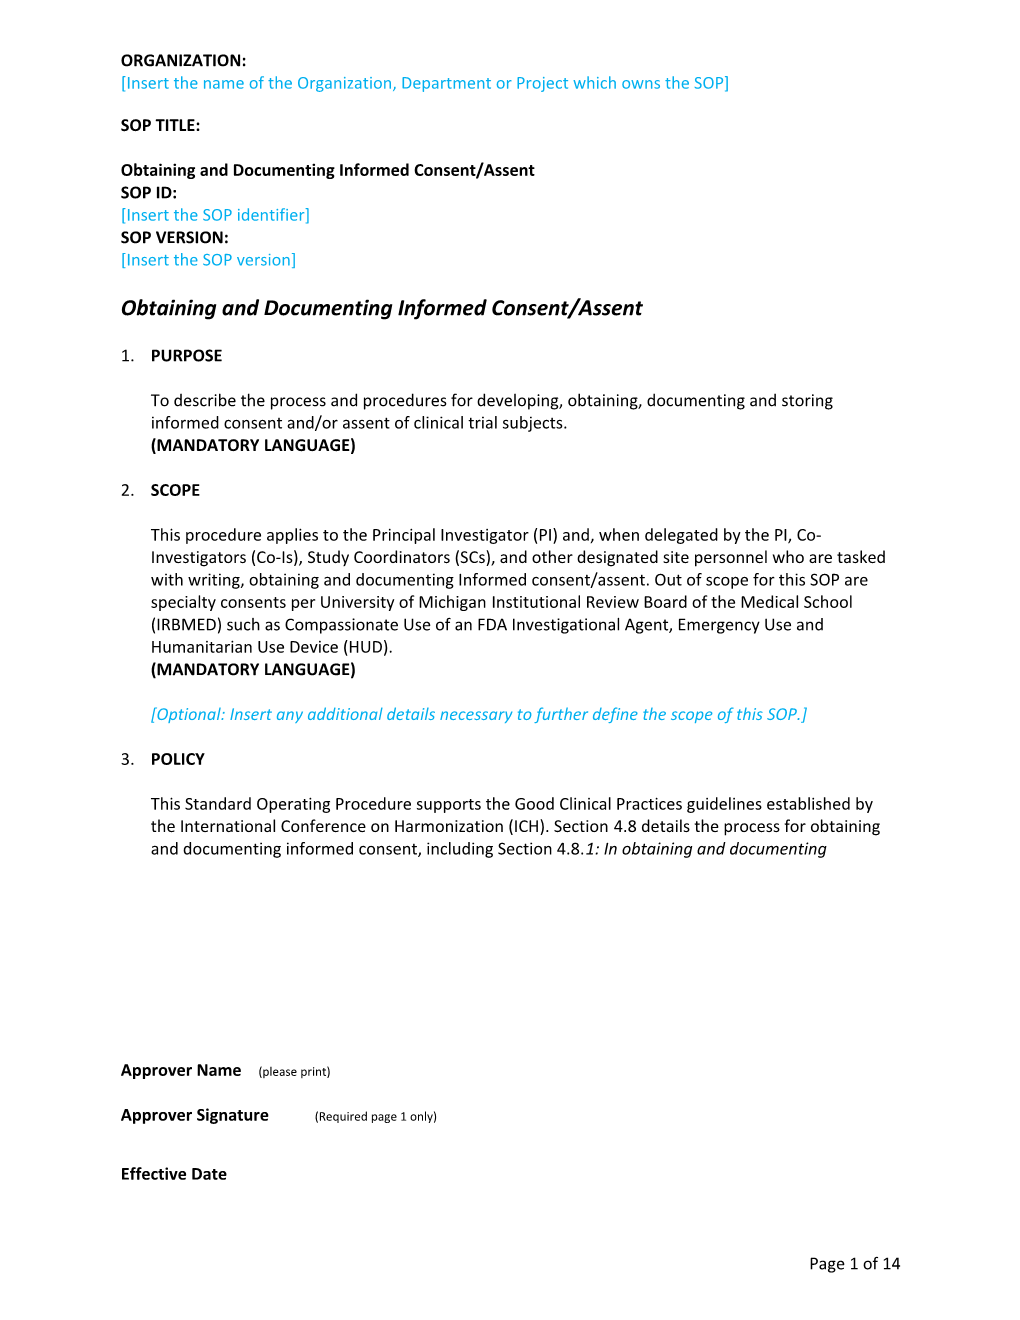 Obtaining and Documenting Informed Consent/Assent